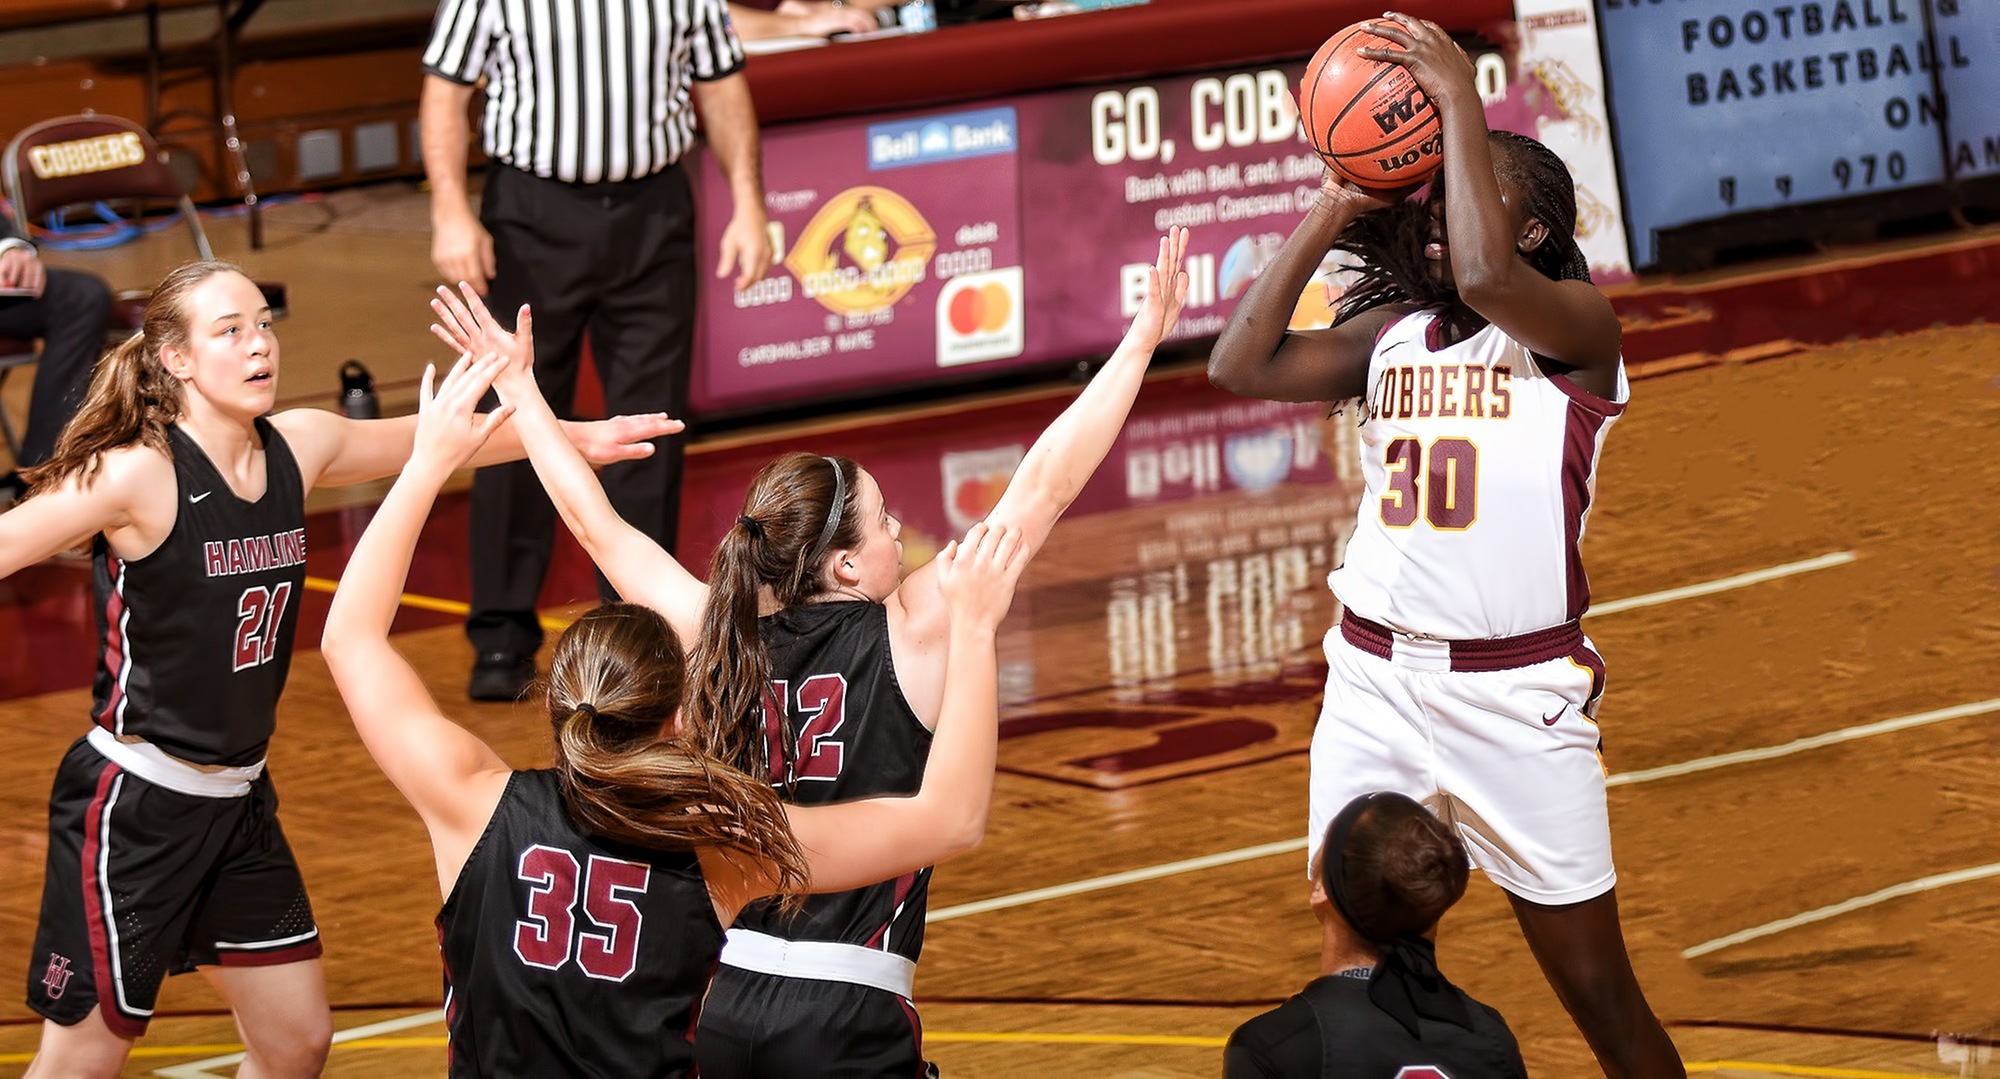 Sophomore Mary Sem goes up for two of her career-high 34 points among four Hamline defenders in the Cobbers' game with the Pipers.